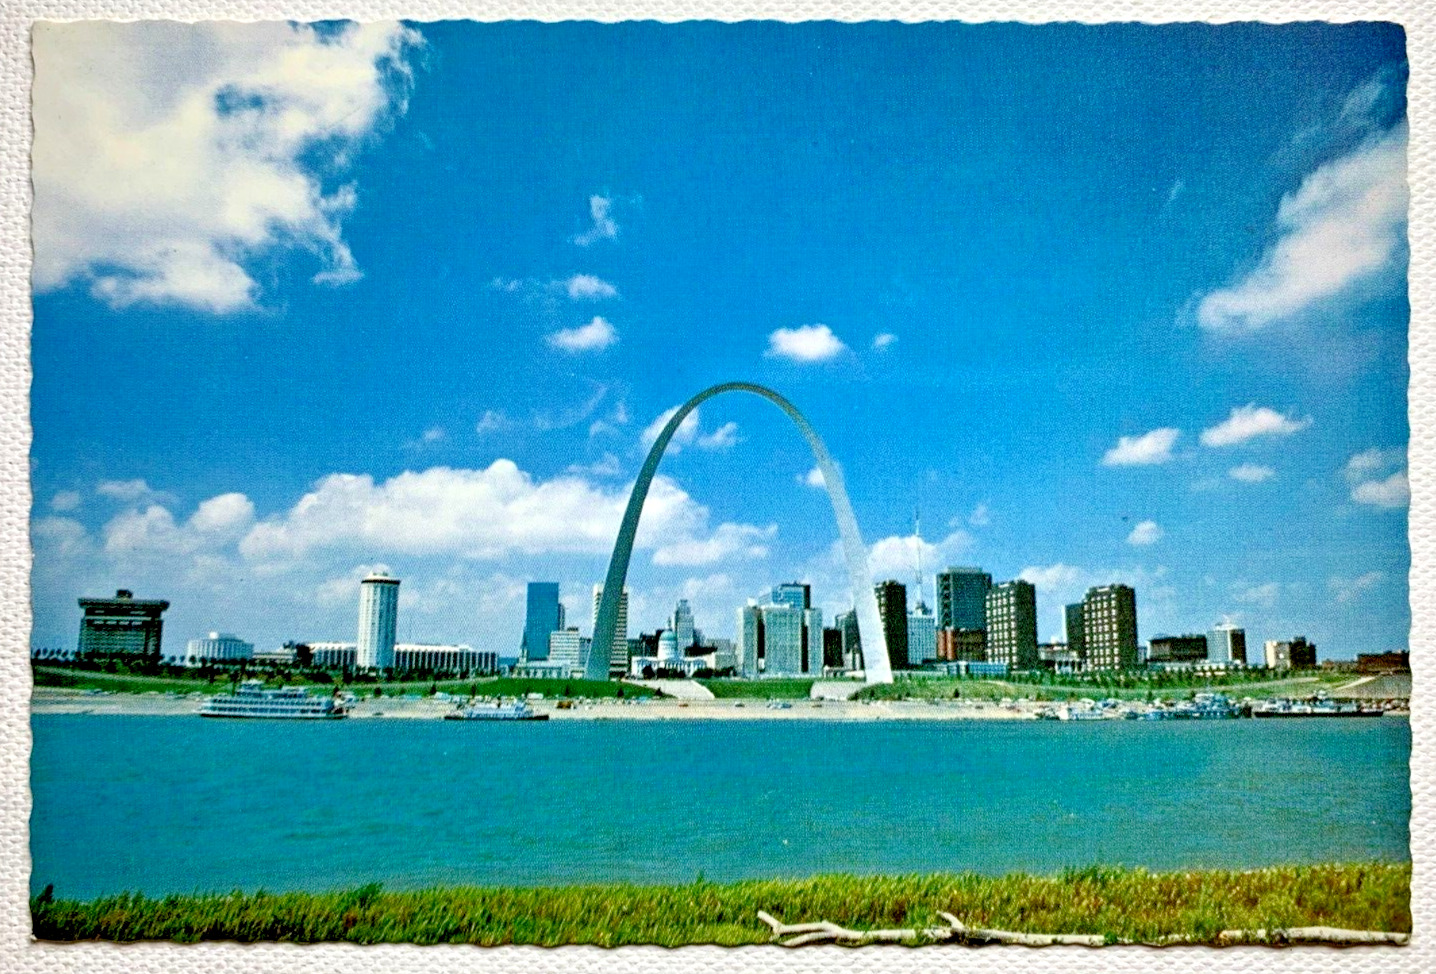 Gateway Arch Mississippi River Reflections Postcard Unposted Mirro-Krome Deckle